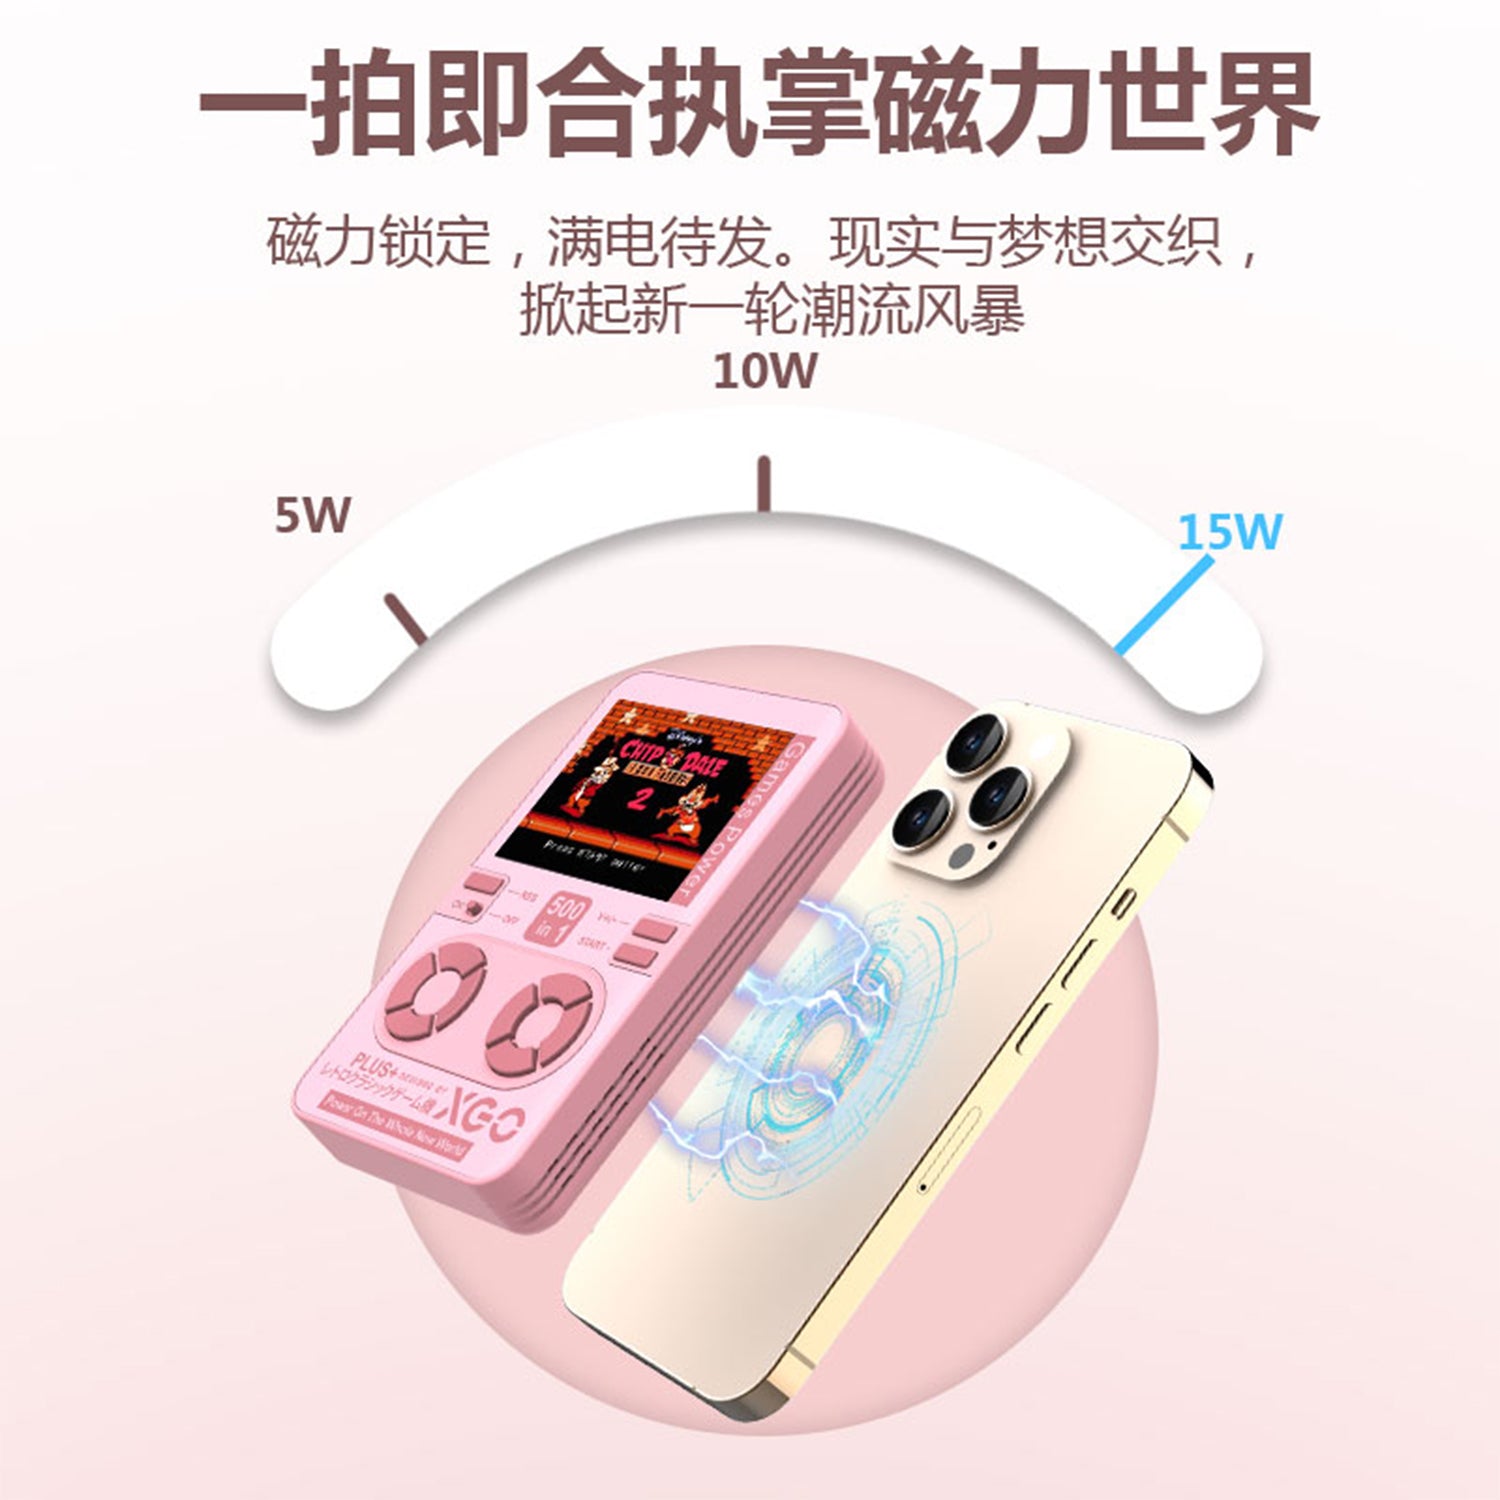 Multi-Functional Wireless Magnetic Power Bank With Mni Gaming Console, 5000mAh Fast Charging, Retro Handheld Game Player